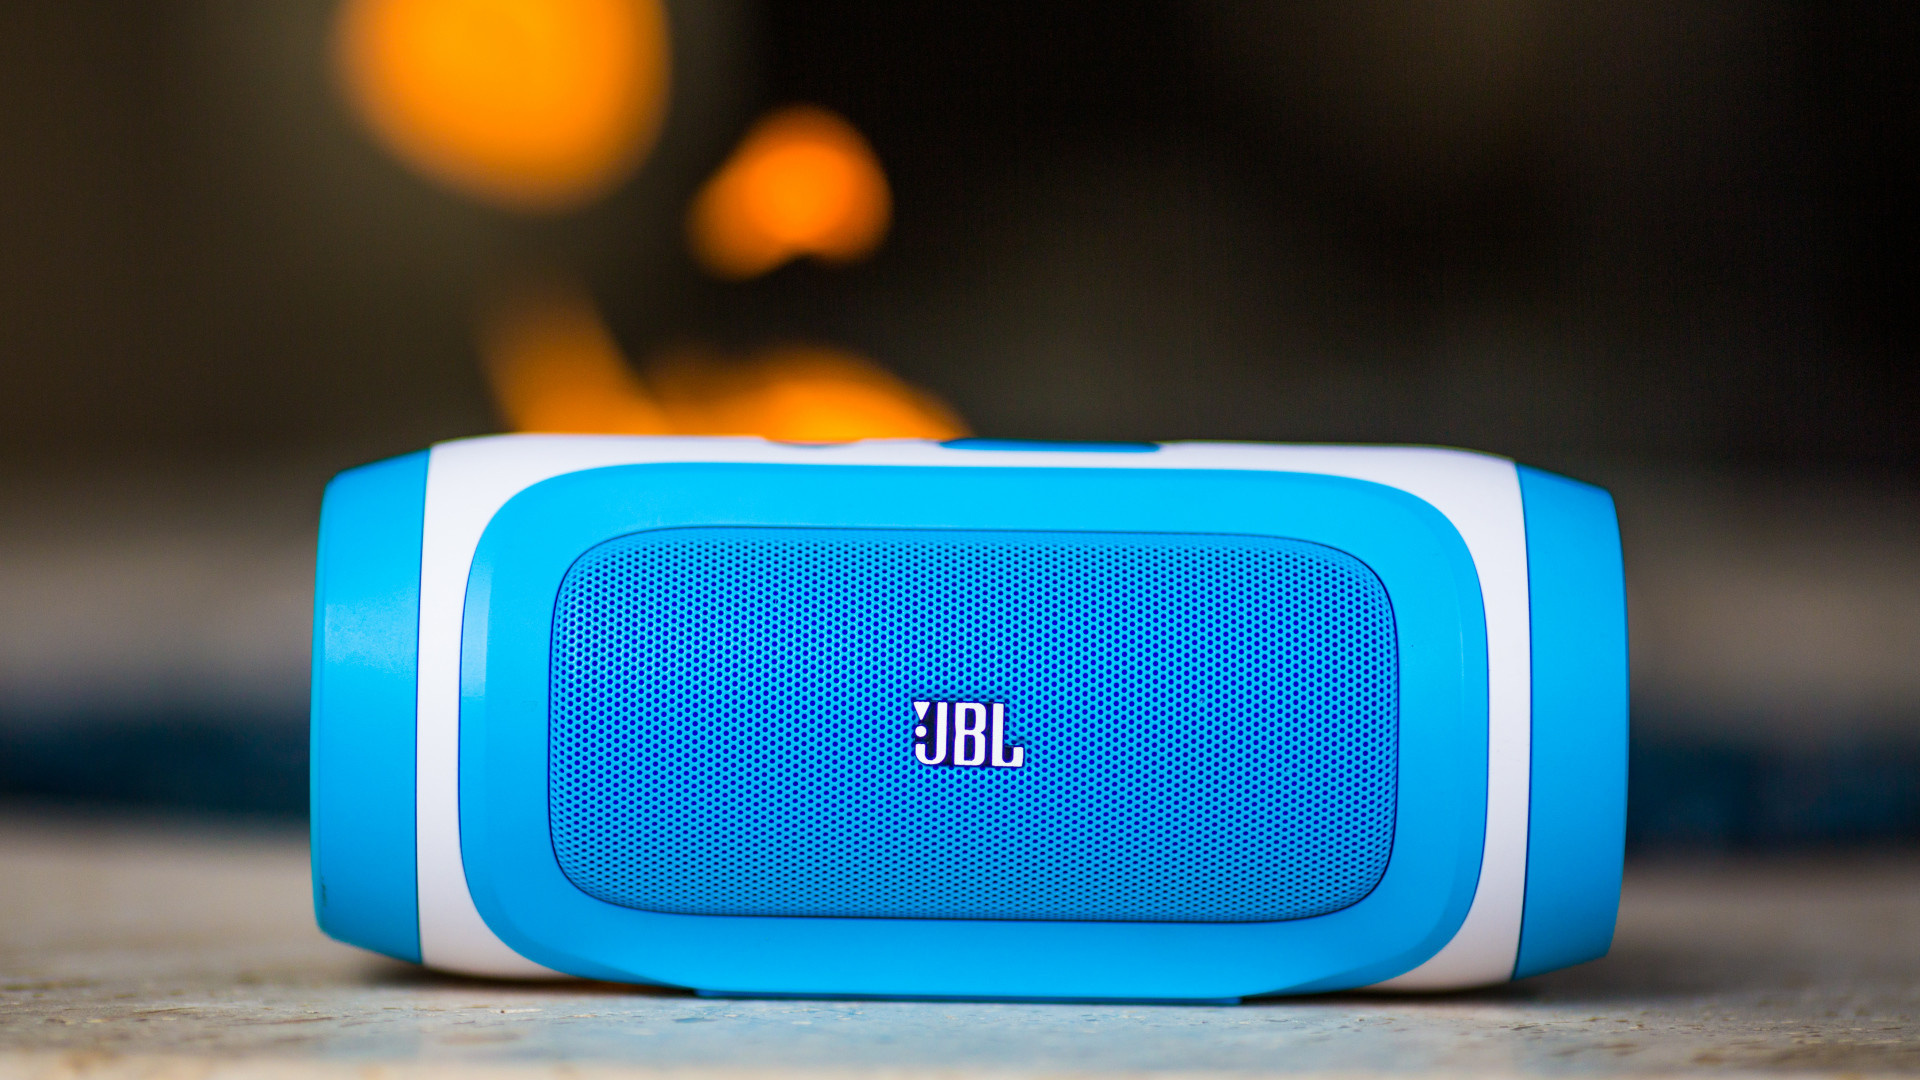 JBL sound, High-quality audio, Music wallpapers, Immersive experience, 1920x1080 Full HD Desktop